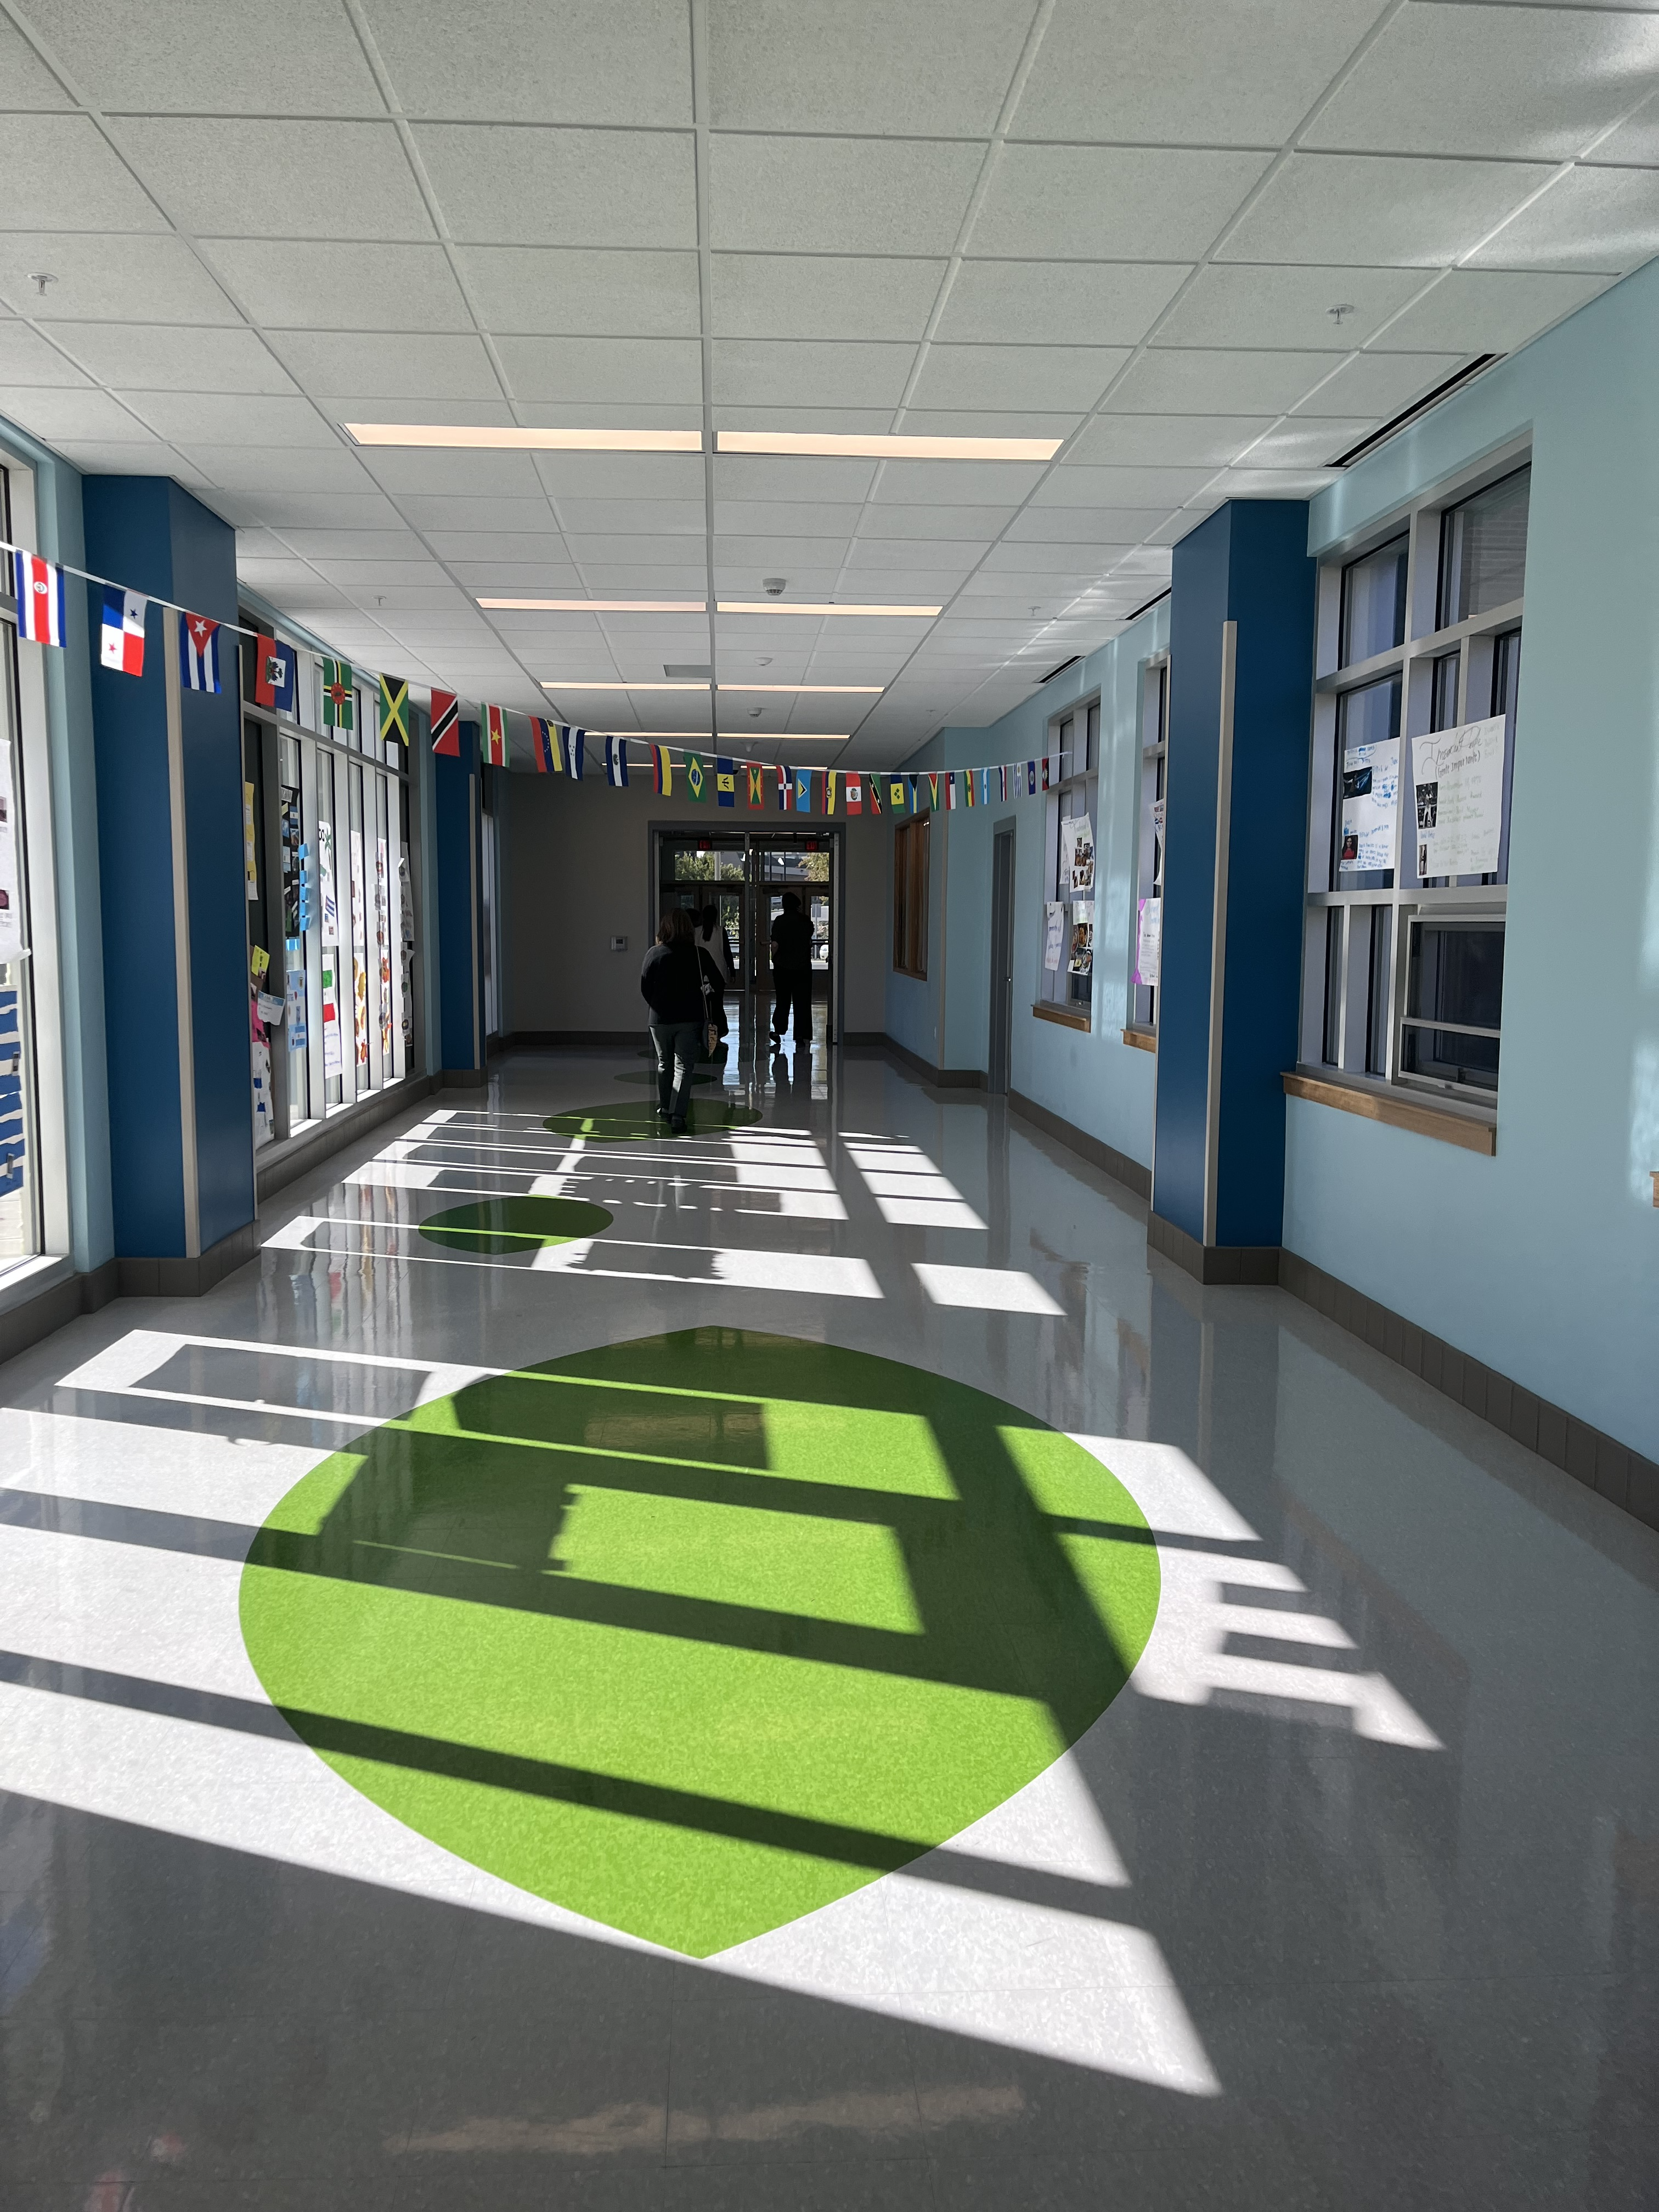 Wide hallways and lots of light are highlights of the new South Lake Building.